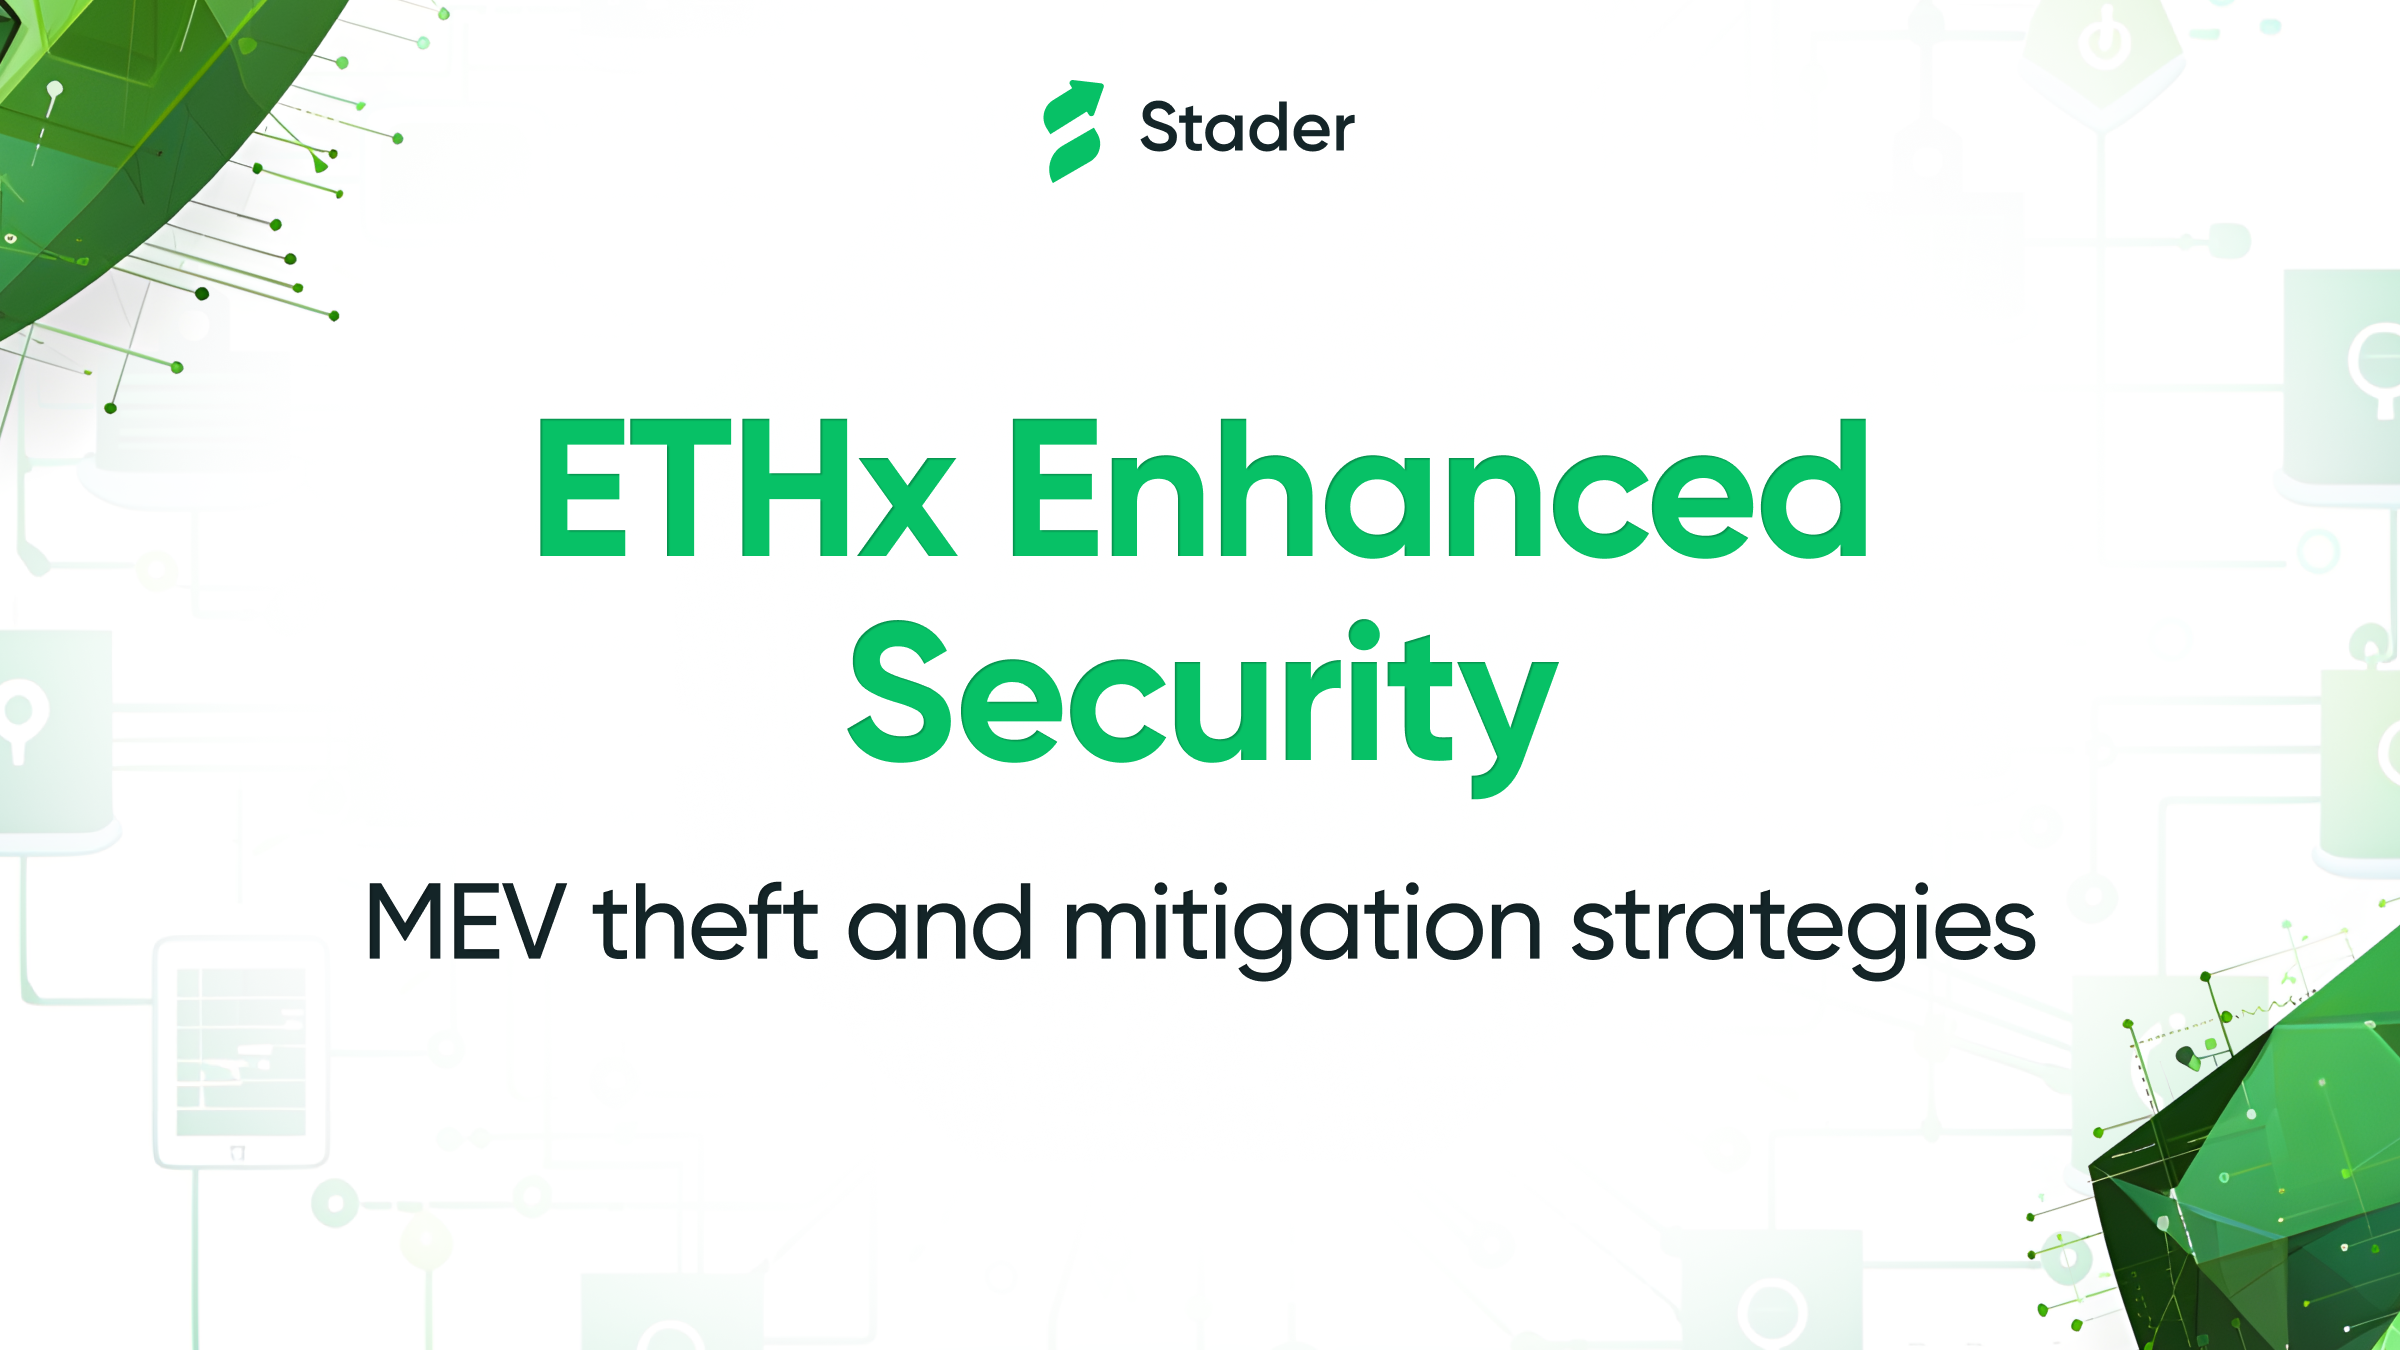 ETHx Enhanced Security | MEV theft and mitigation strategies